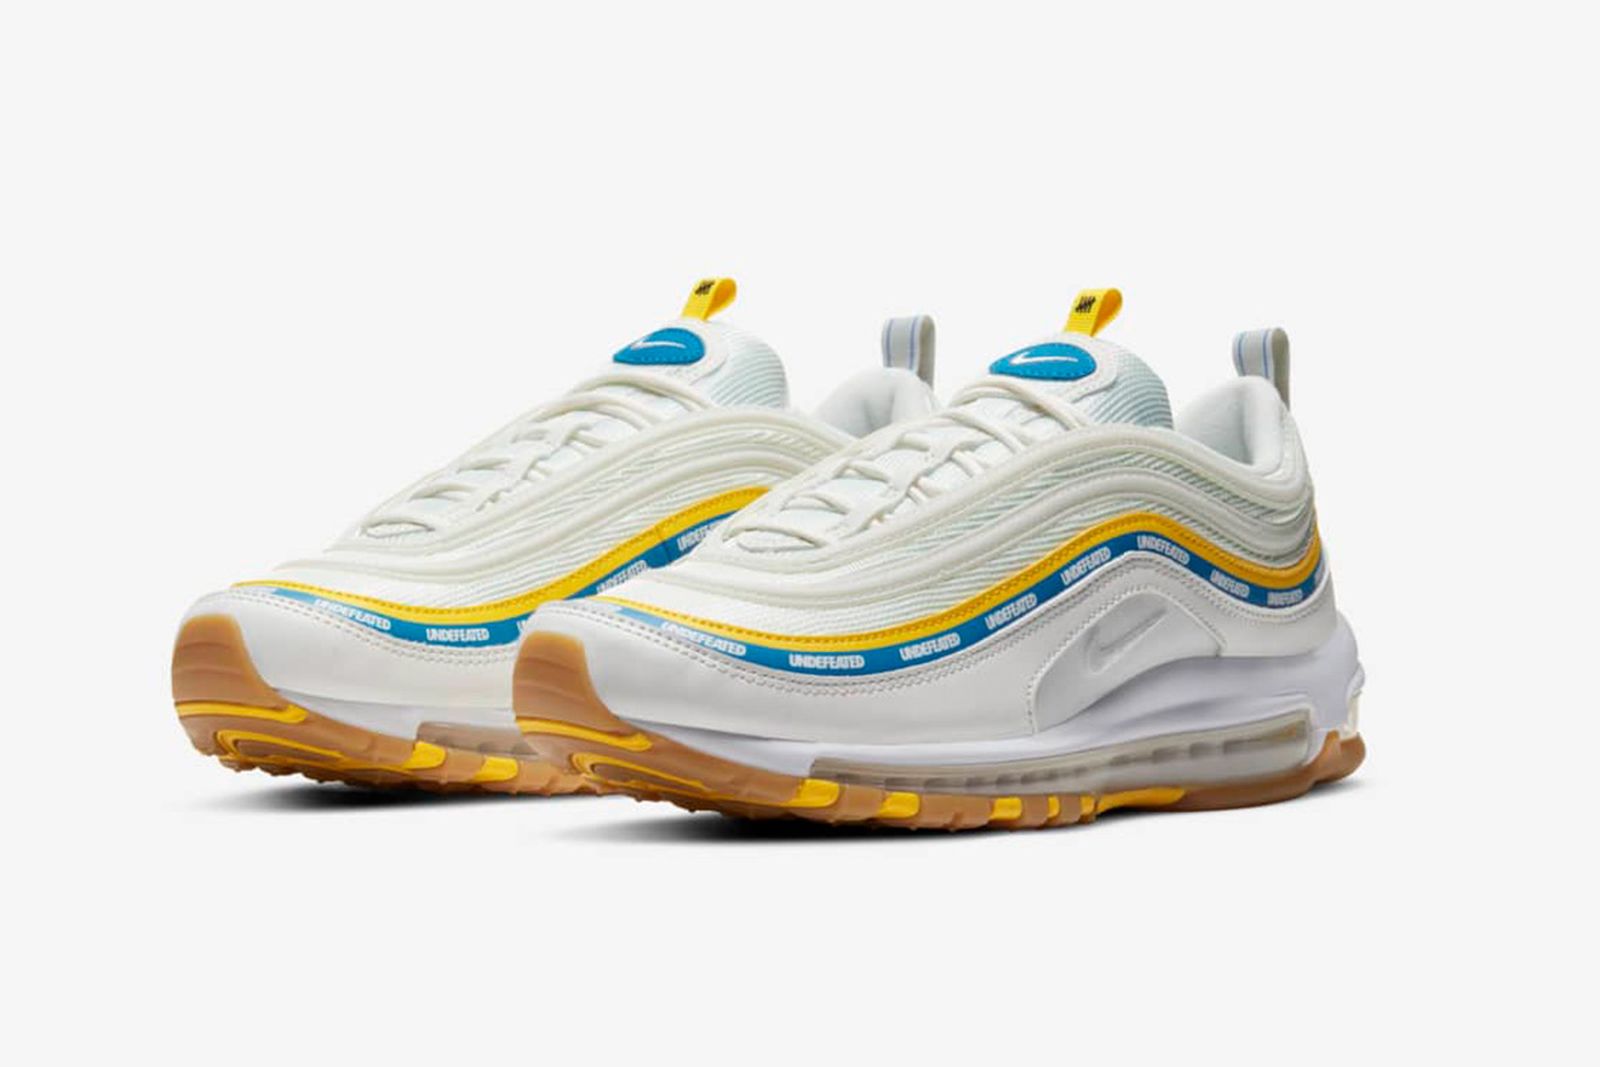 suelo Perder Hacer bien UNDEFEATED x Nike Air Max 97 White/Gold: Where to Buy Tomorrow